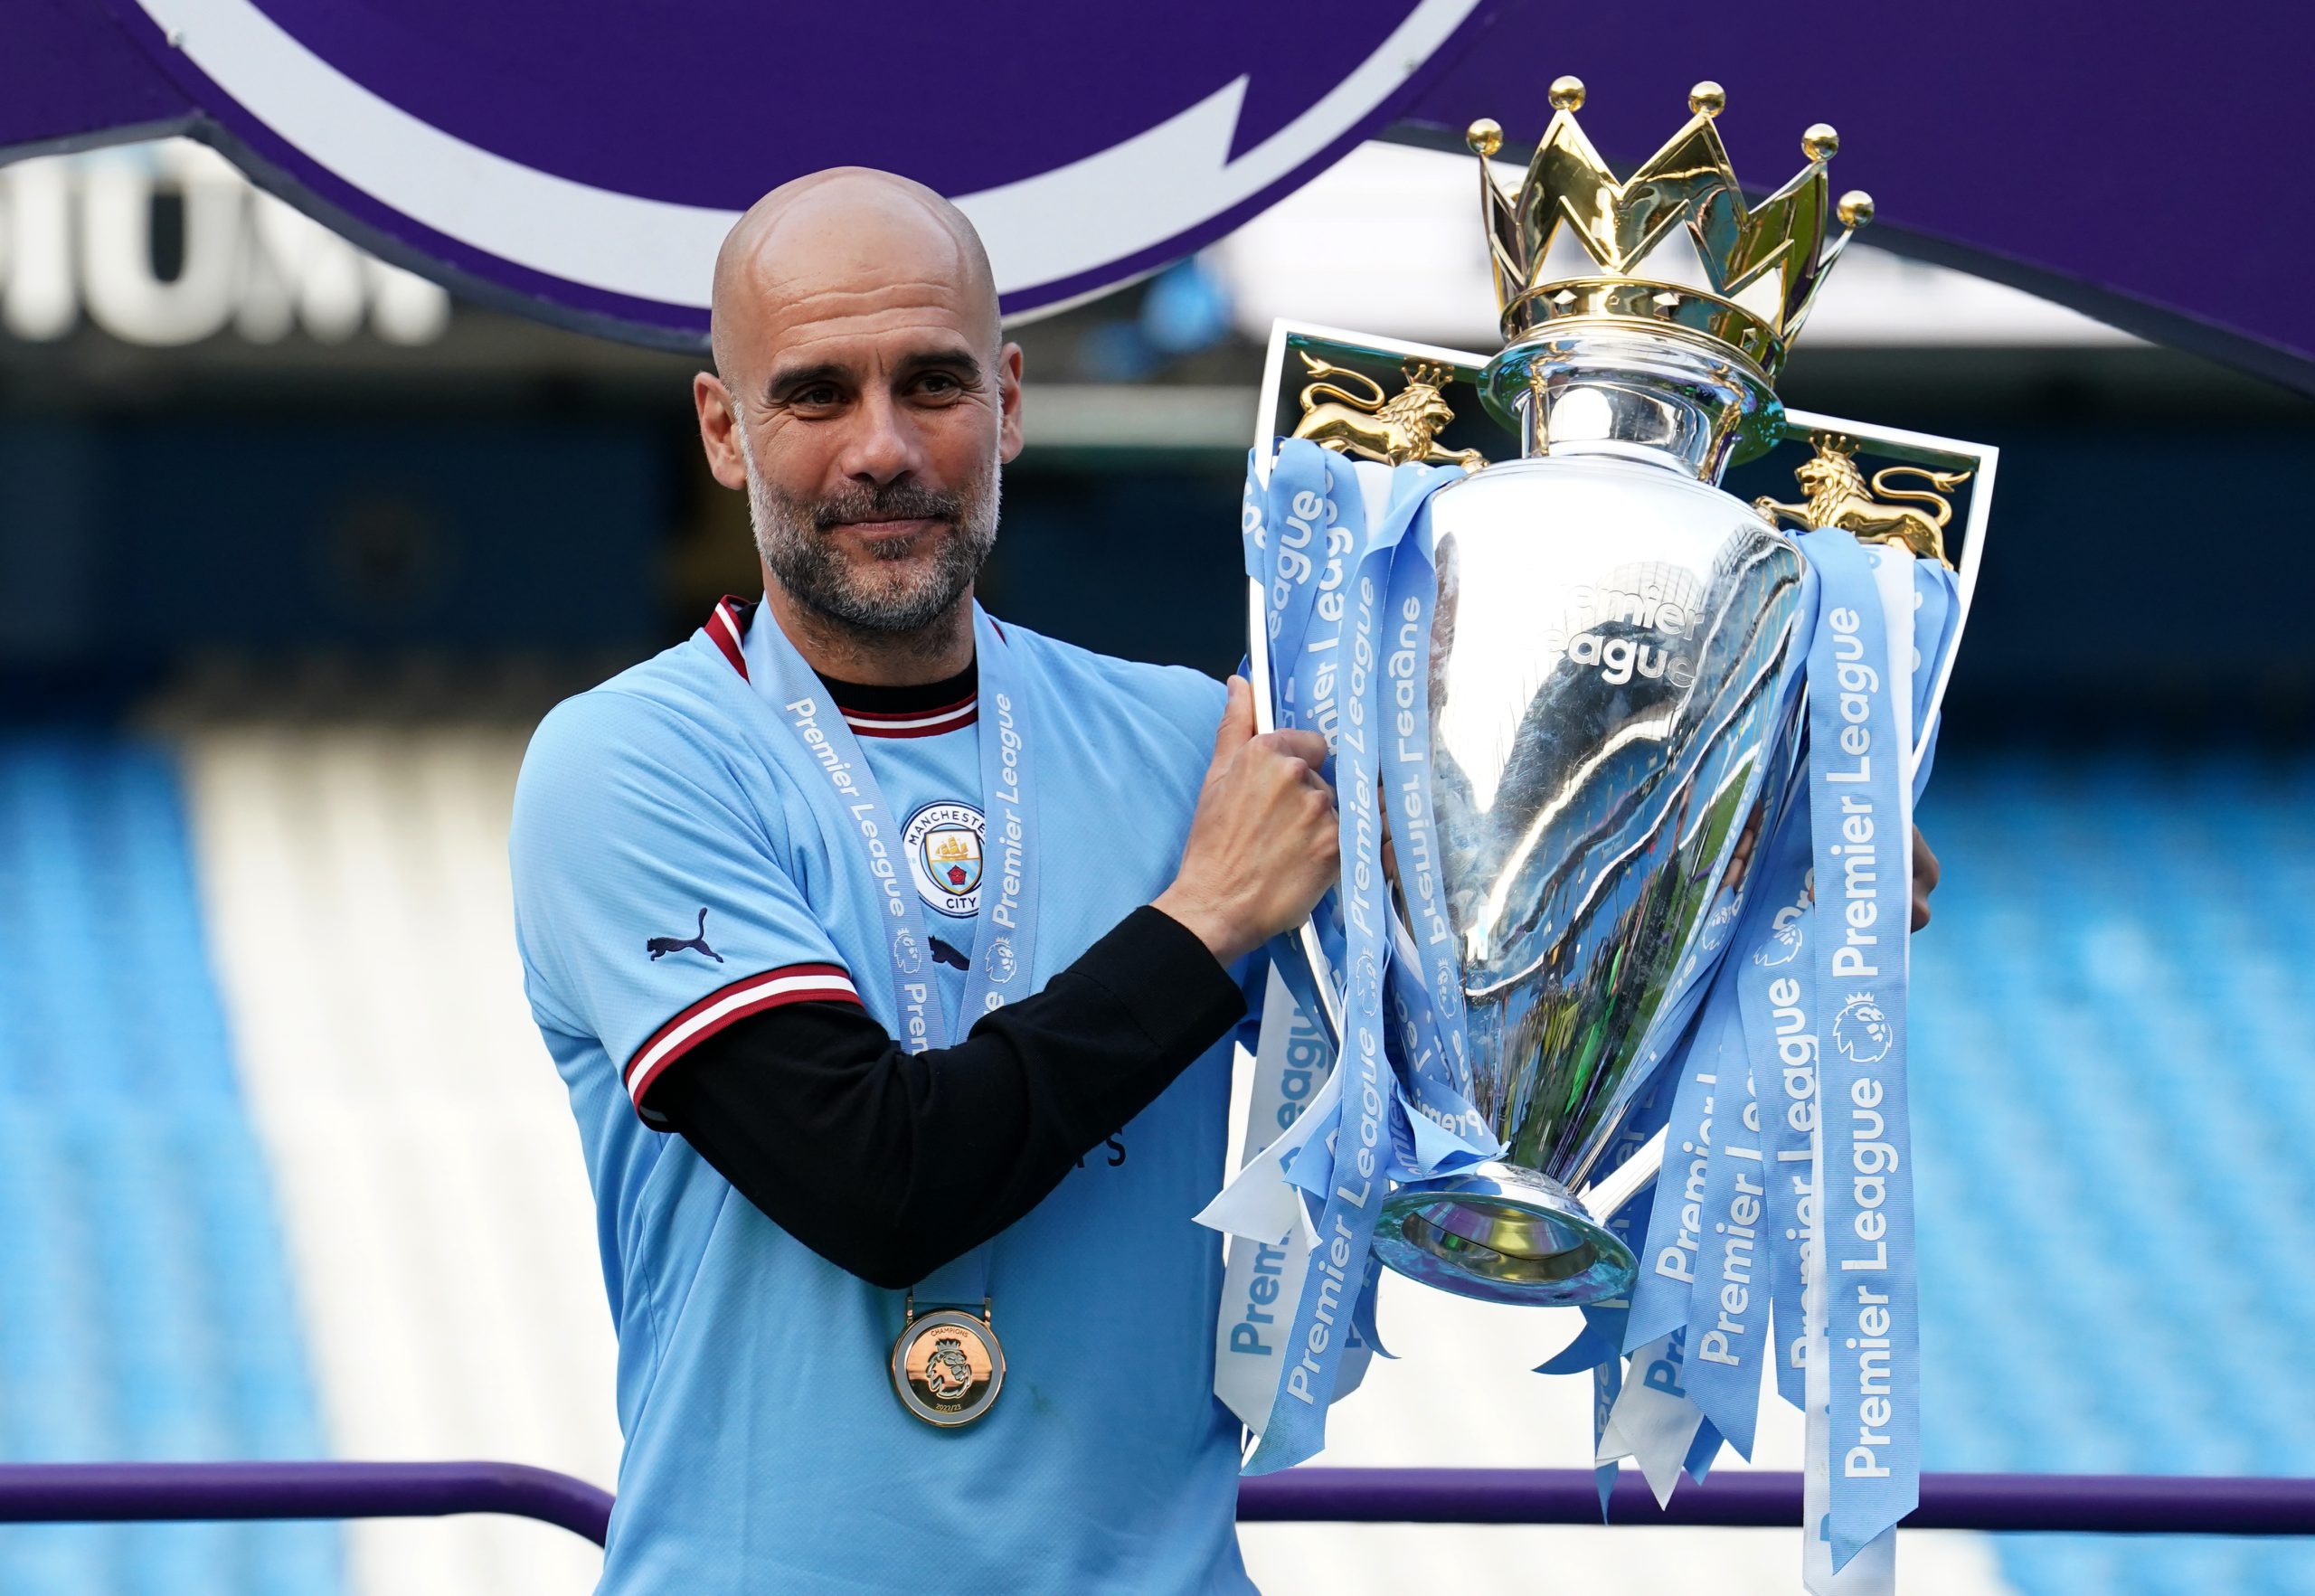 Softer start for Man City as new teams face tough tests – PL fixtures analysed